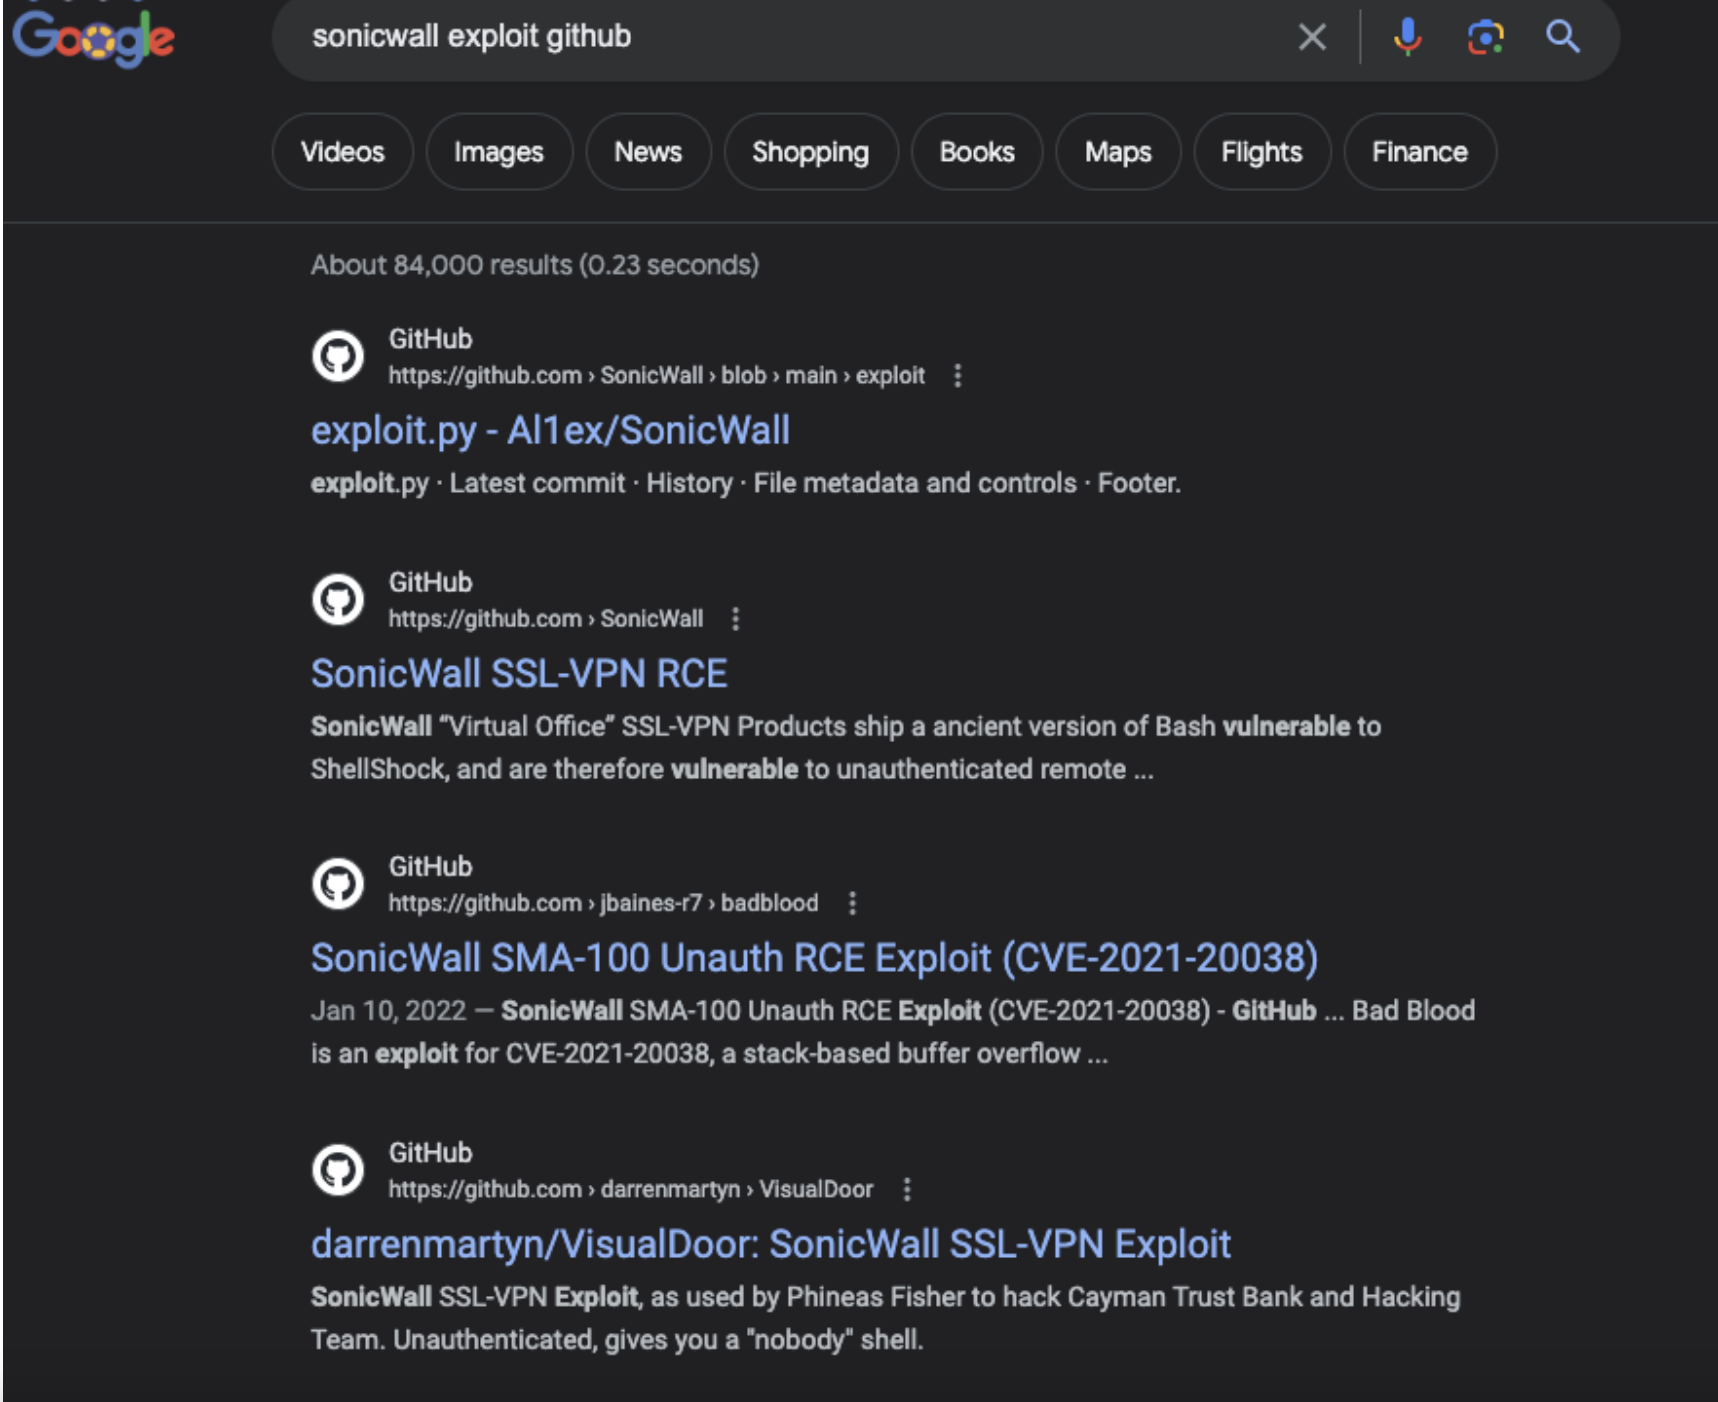 An easy Google search showing various vulnerabilities and PoCs for Sonicwal